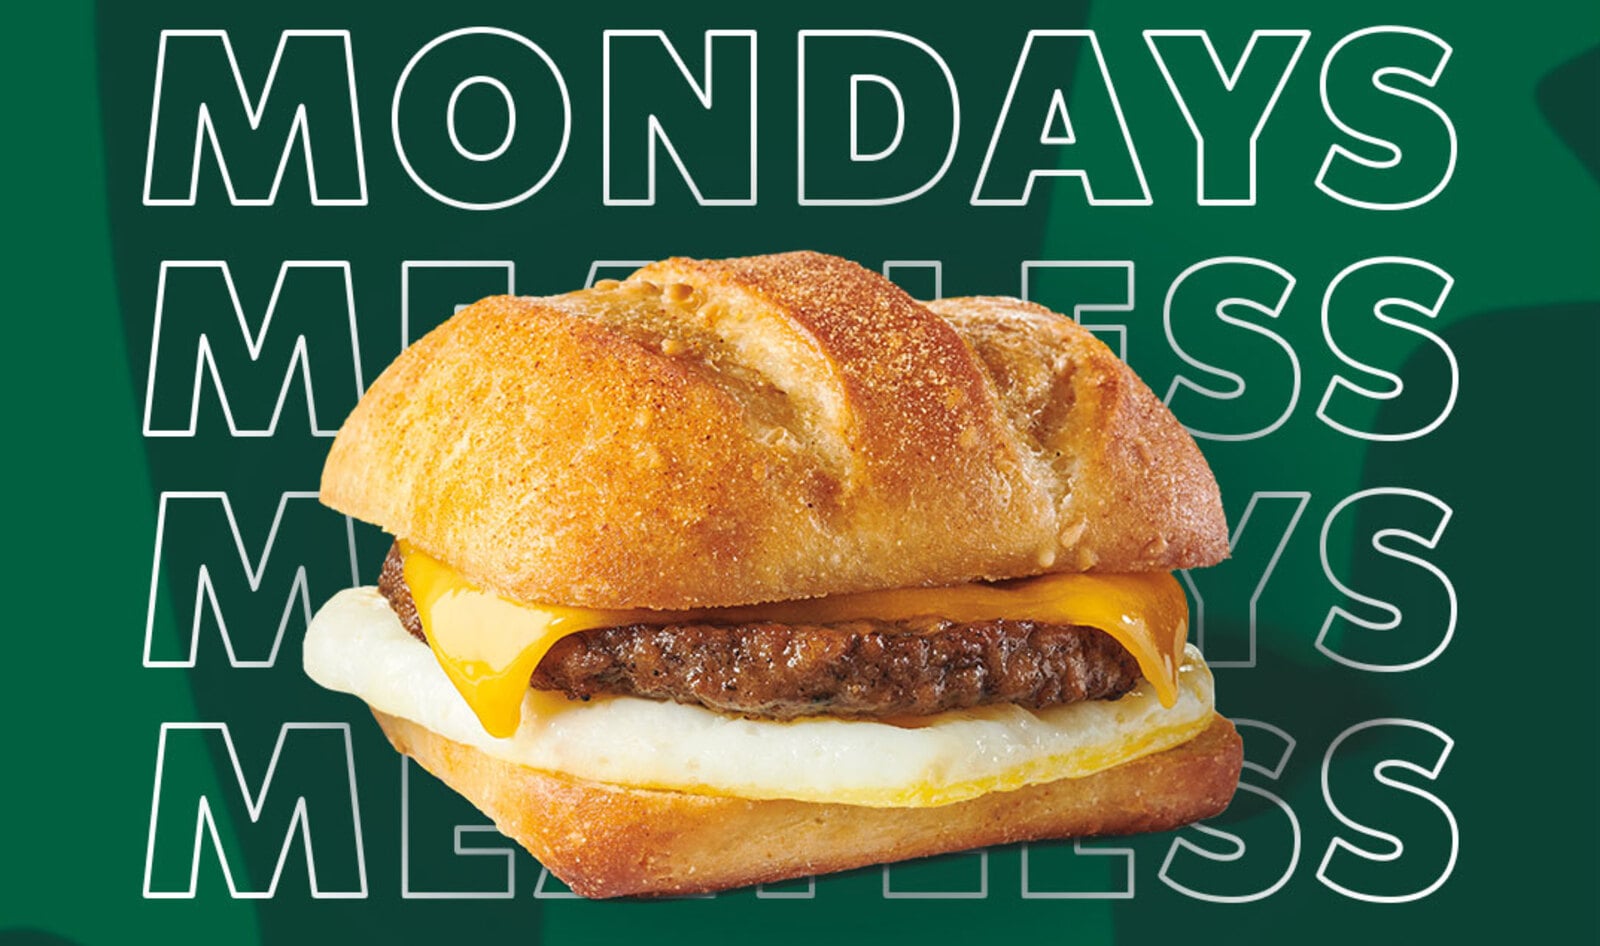 Starbucks Is Officially Promoting Meatless Mondays for the First Time